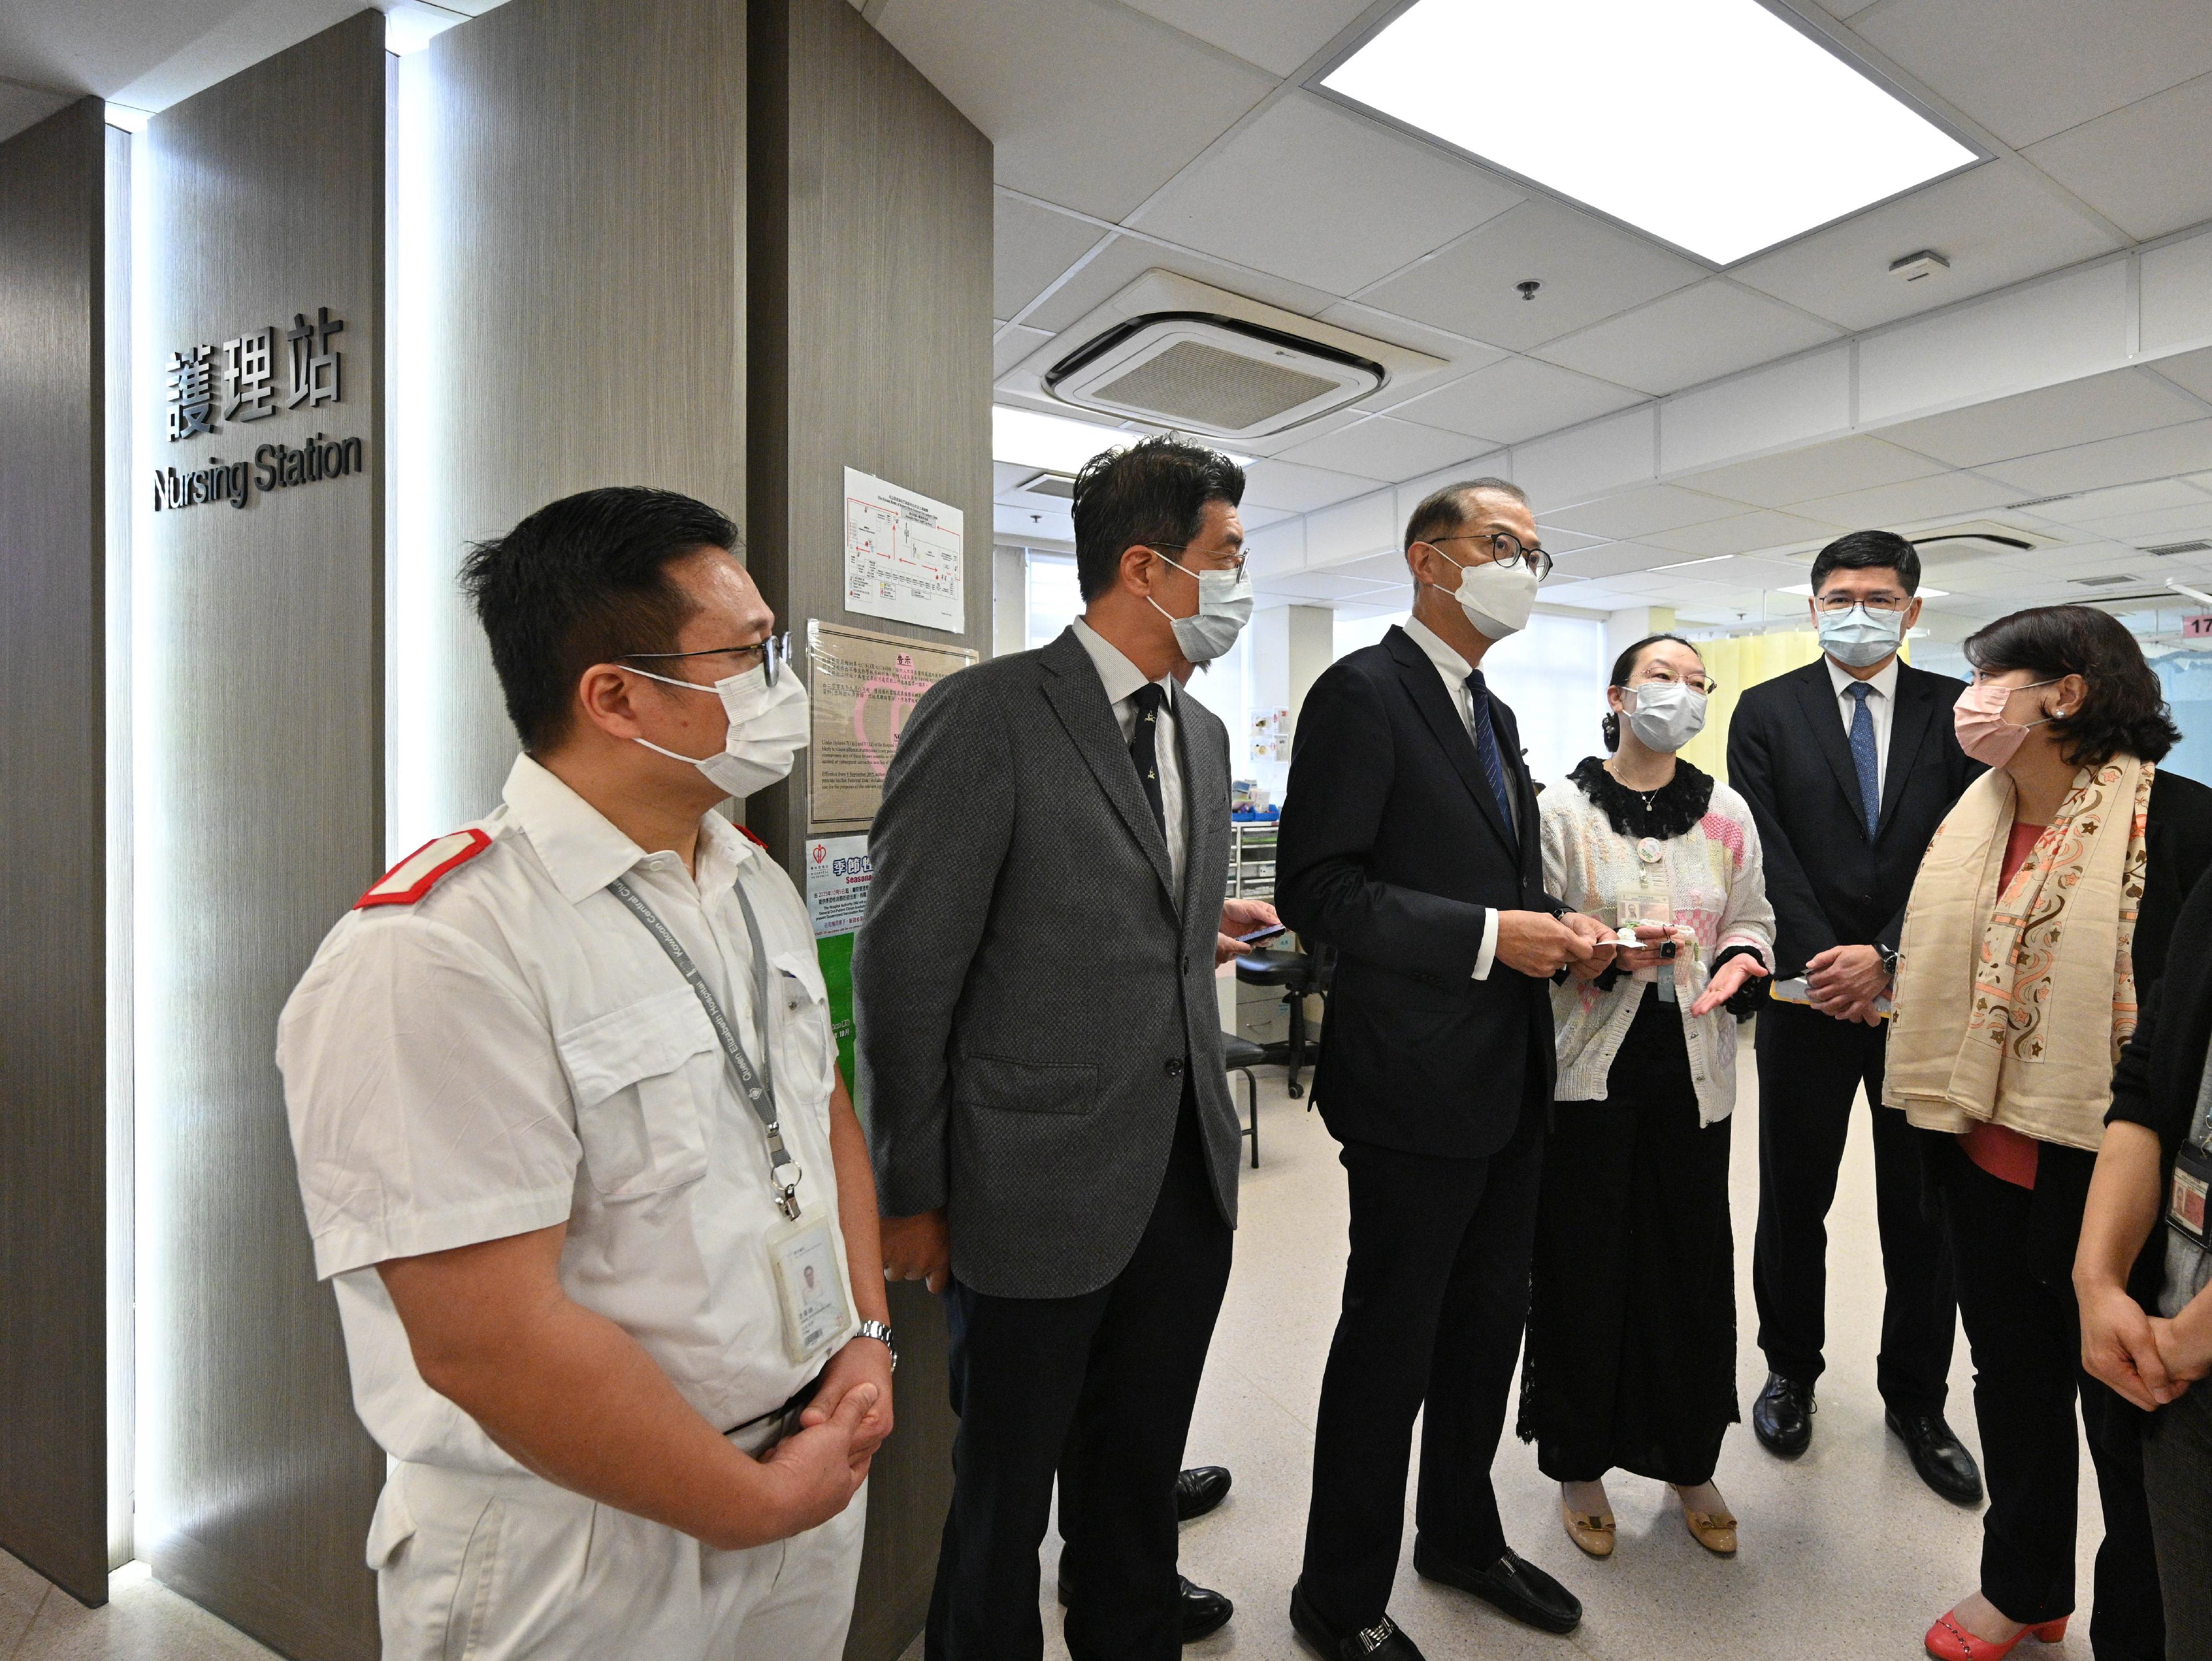 The Secretary for Health, Professor Lo Chung-mau (third left); the Under Secretary for Health, Dr Libby Lee (first right); and the Commissioner for Primary Healthcare, Dr Pang Fei-chau (second left), inspect Robert Black General Out-patient Clinic (GOPC) this morning (February 6) to know more about the daily operation of the GOPC in the company of the Chief Executive of the Hospital Authority, Dr Tony Ko (second right).